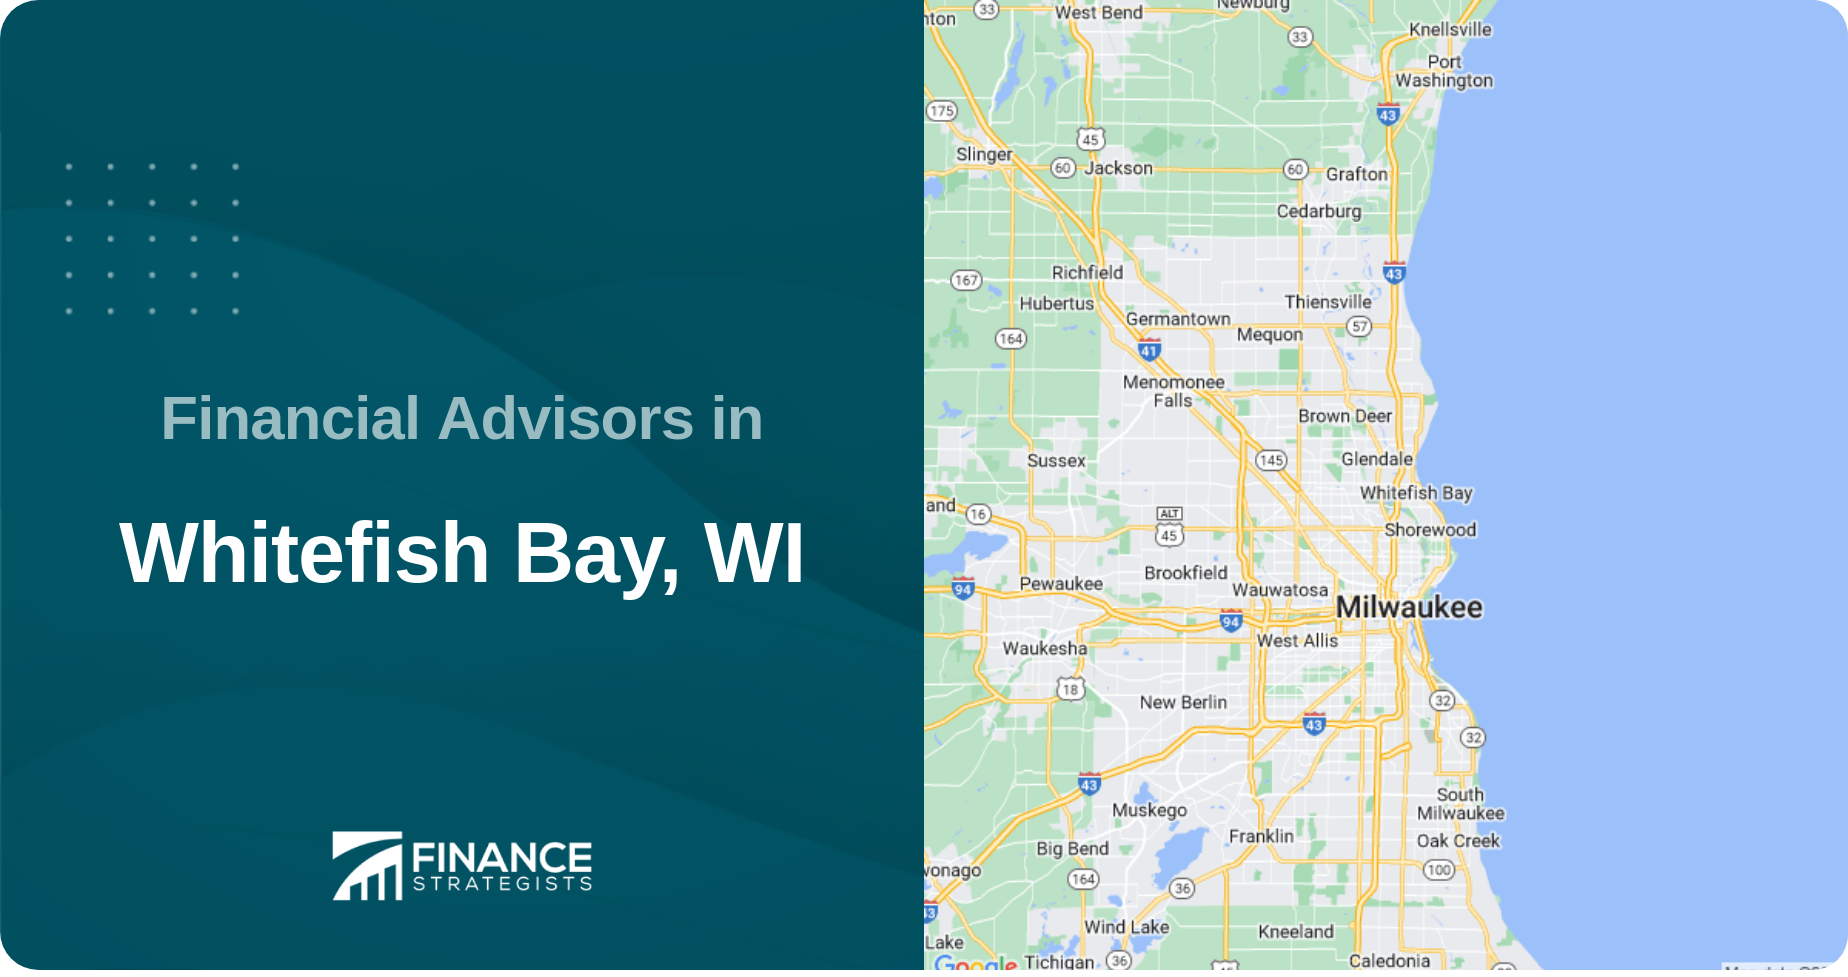 Financial Advisors in Whitefish Bay, WI